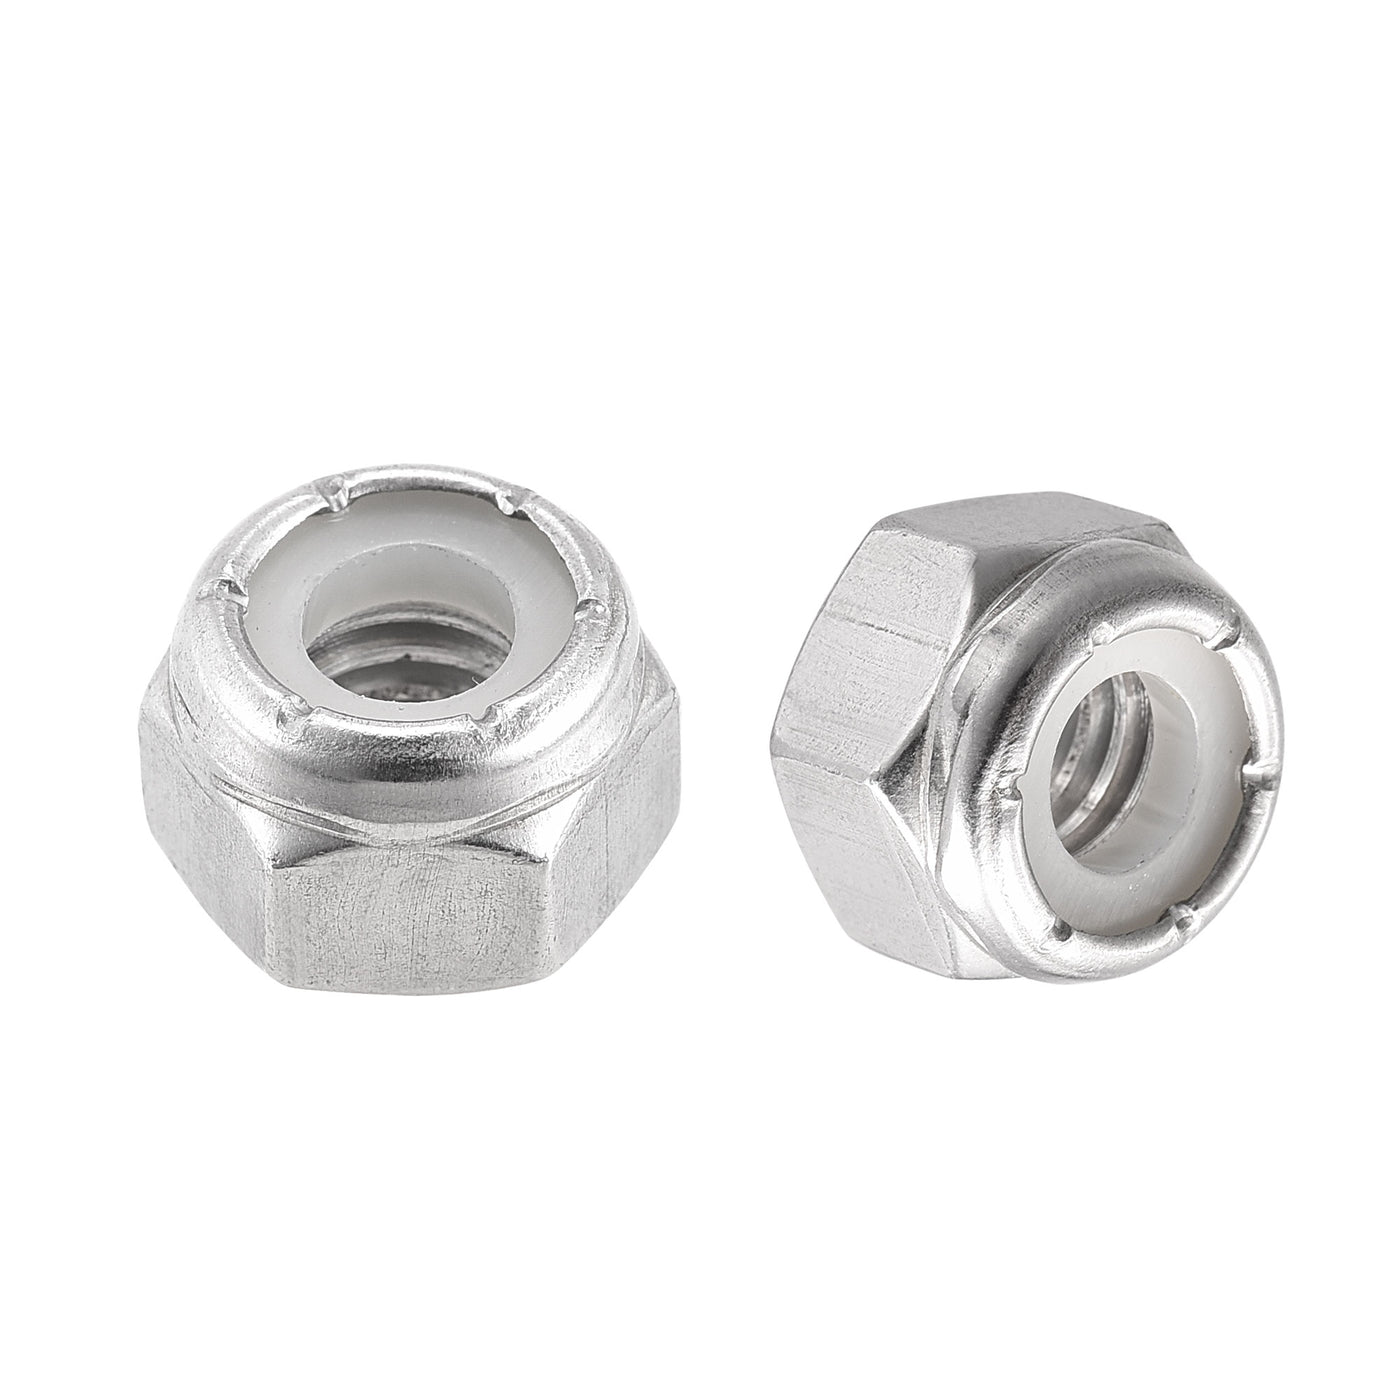 uxcell Uxcell 5/16-18 UNC Nylon Insert Hex Lock Nuts, 304 Stainless Steel, Plain Finish, 50pcs